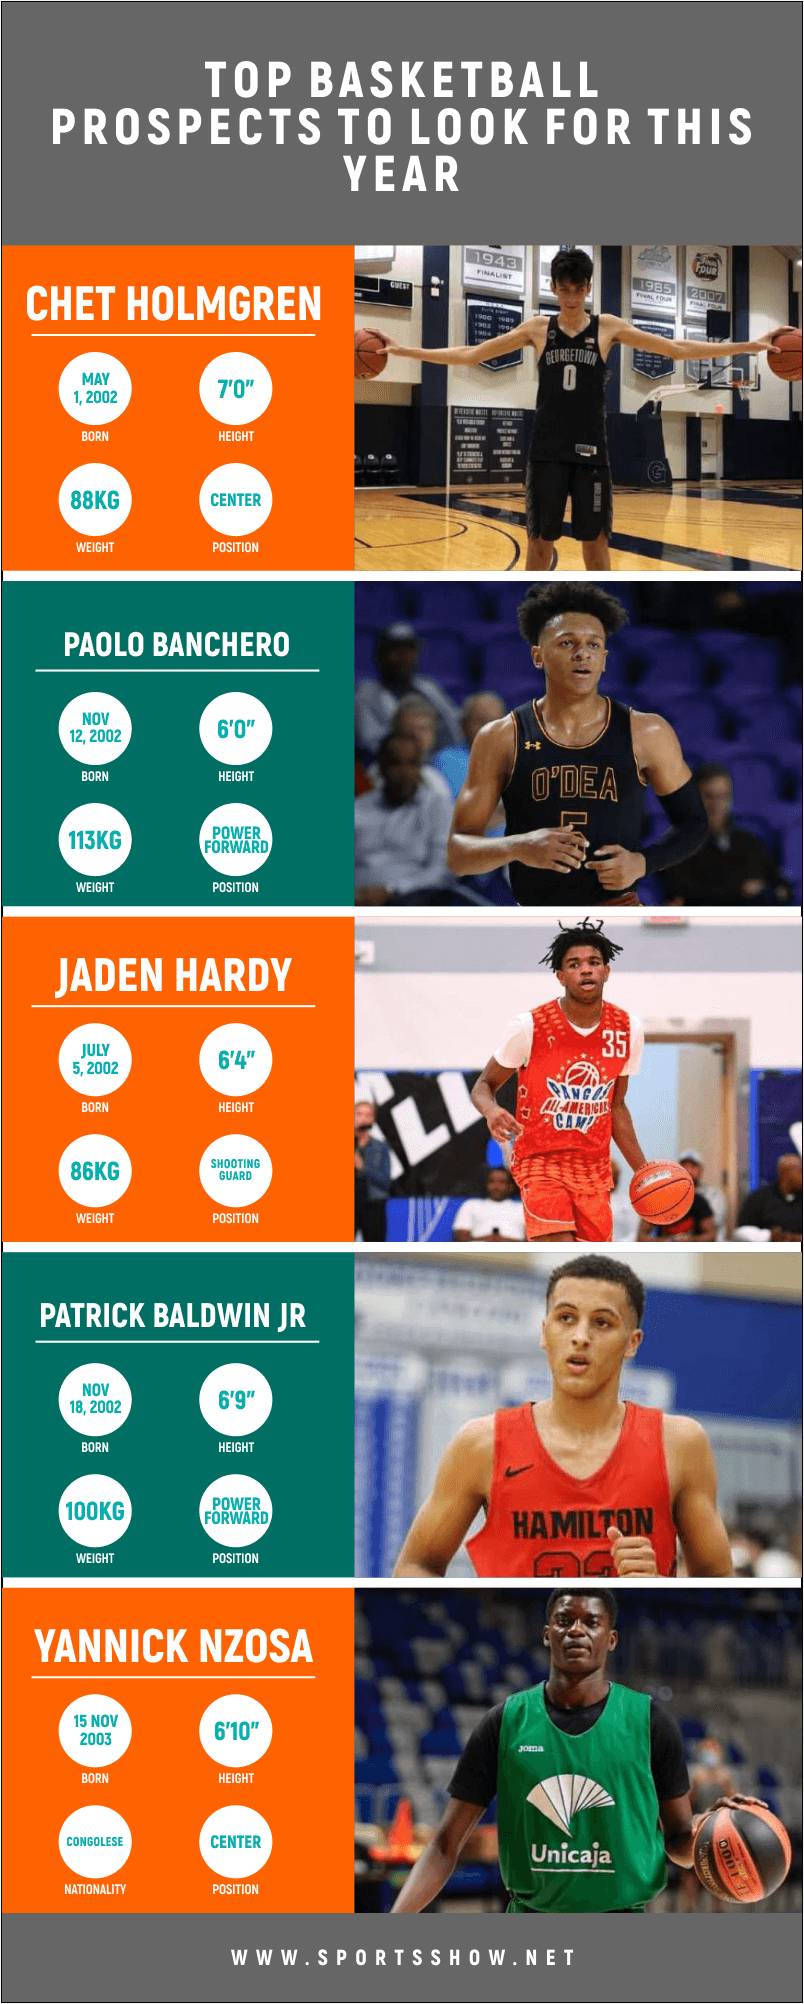 10 Top Basketball Prospects To Look For This Year 2021 Power Ranking